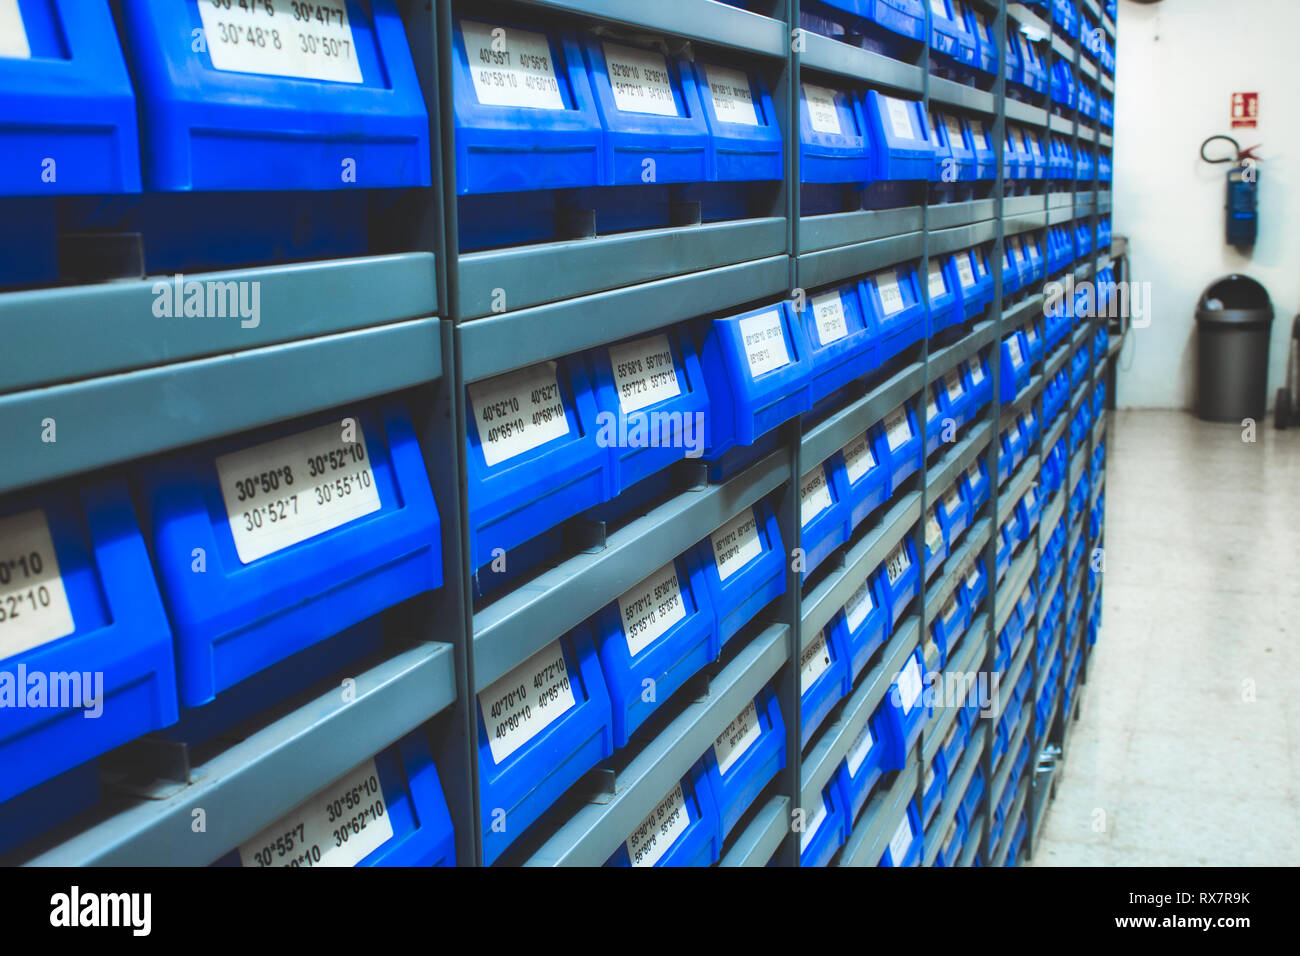 Blue plastic draws of stock / parts in rows of shelves in a warehouse Stock Photo